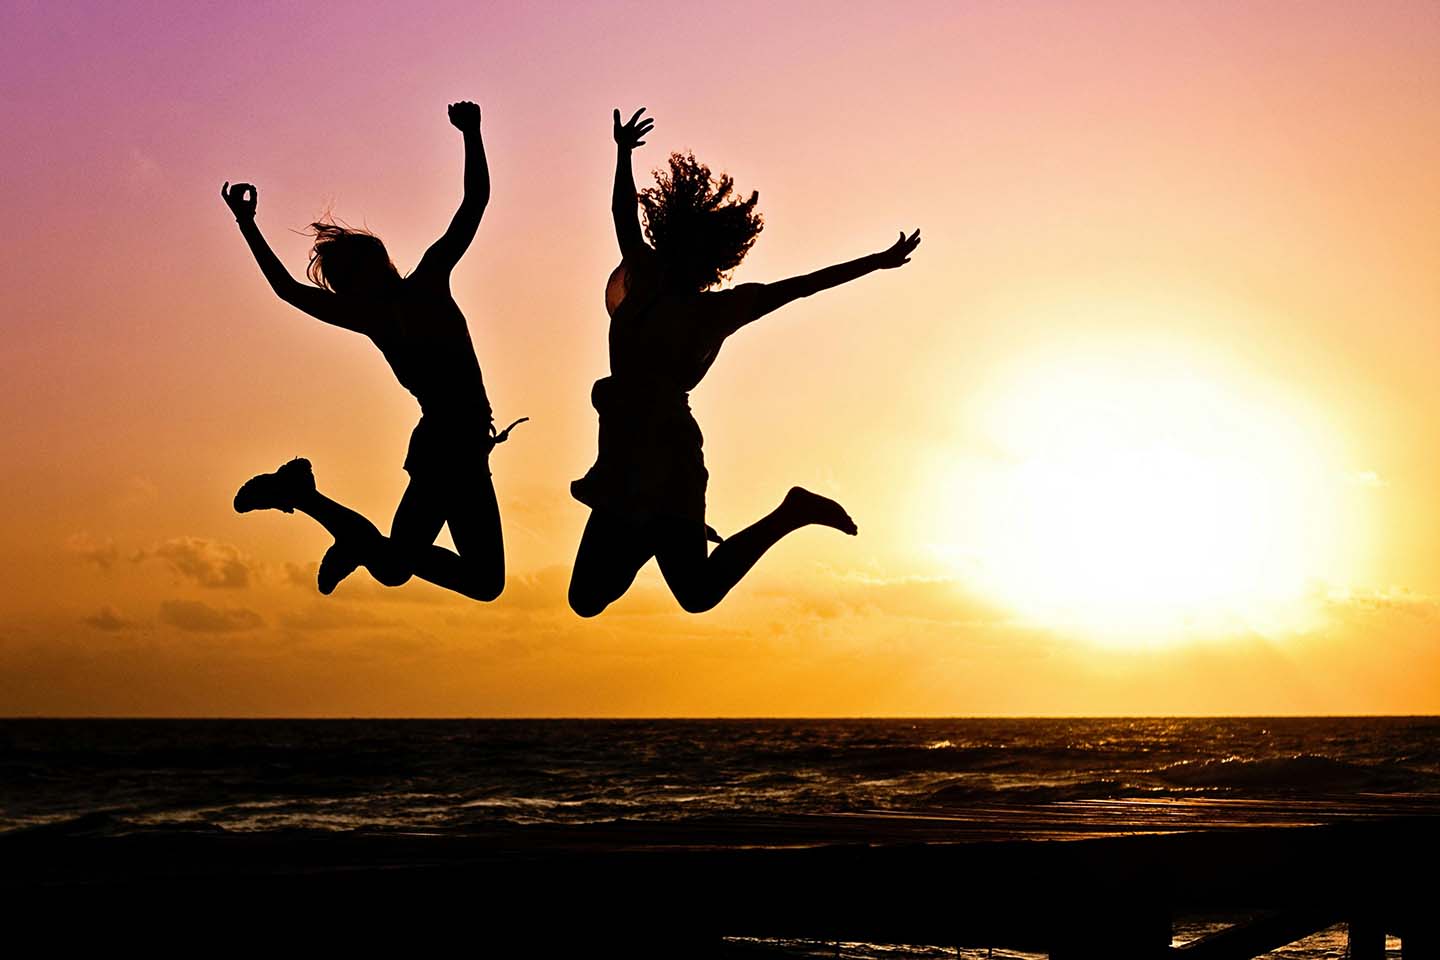 Two people in silhouette jumping in the air